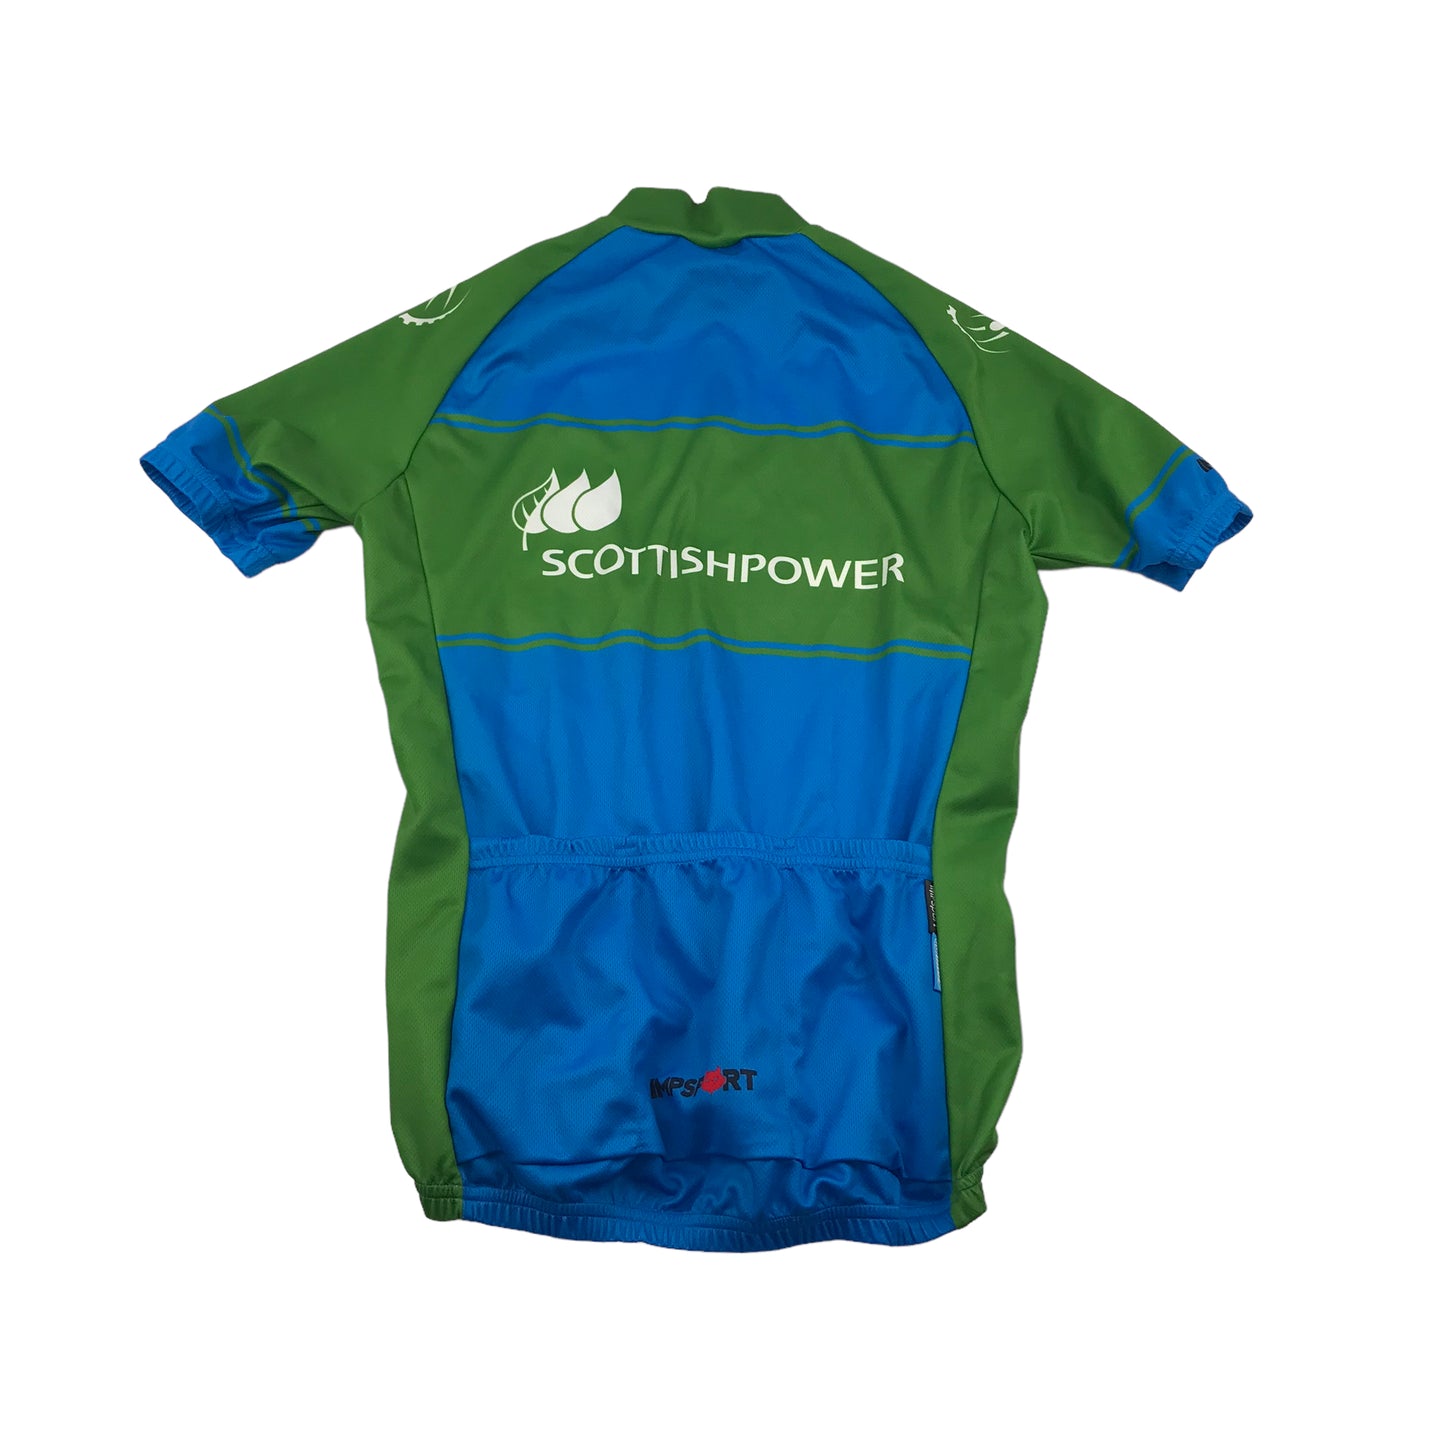 Impsport Green and Blue Short Sleeve Cycling Sports Top Adult Size S